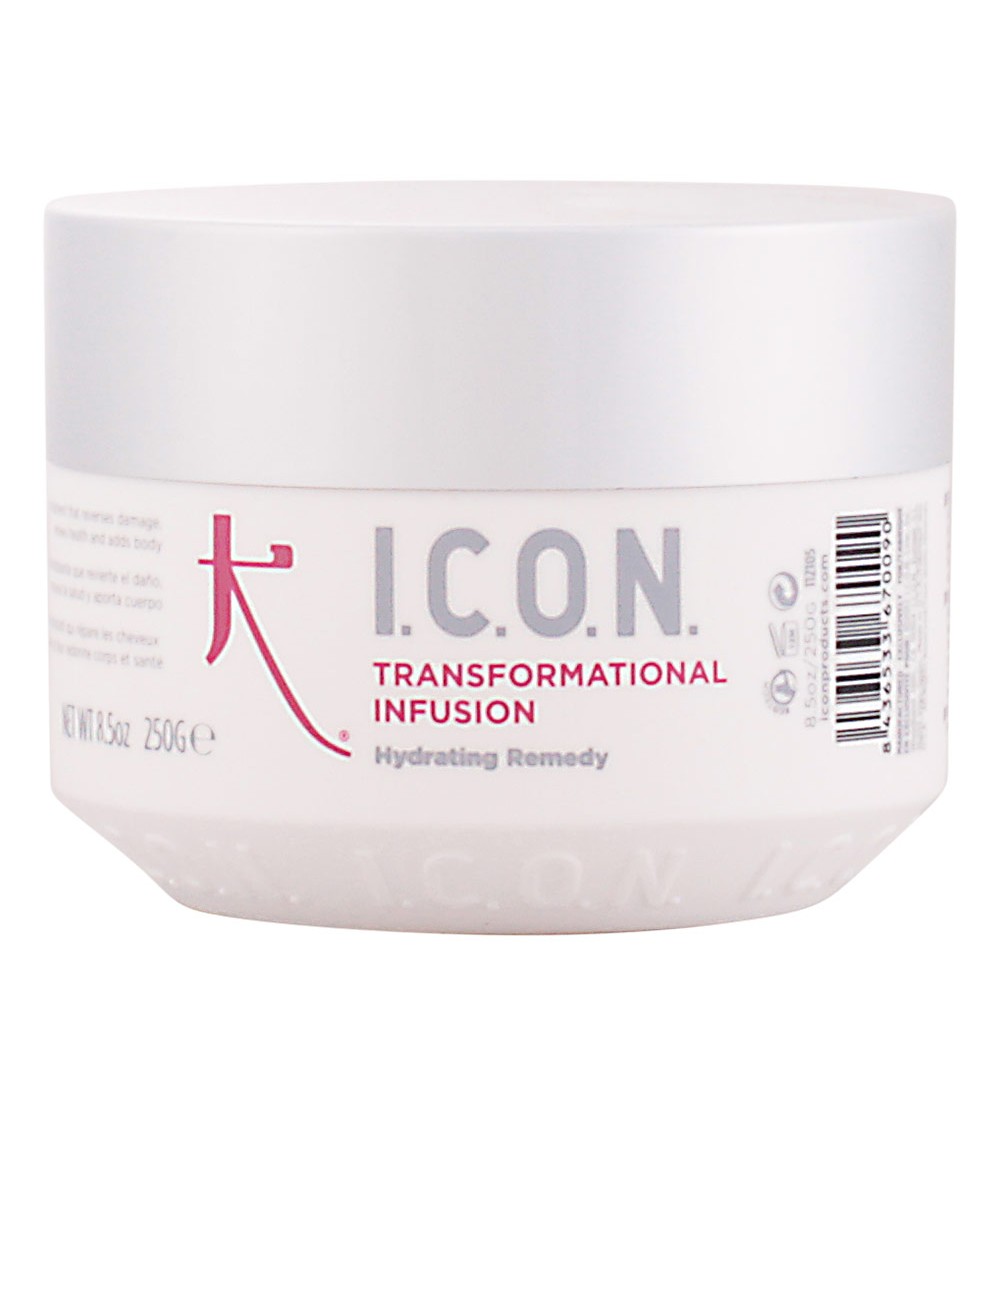 TRANSFORMATIONAL INFUSION hydrating remedy 250 gr